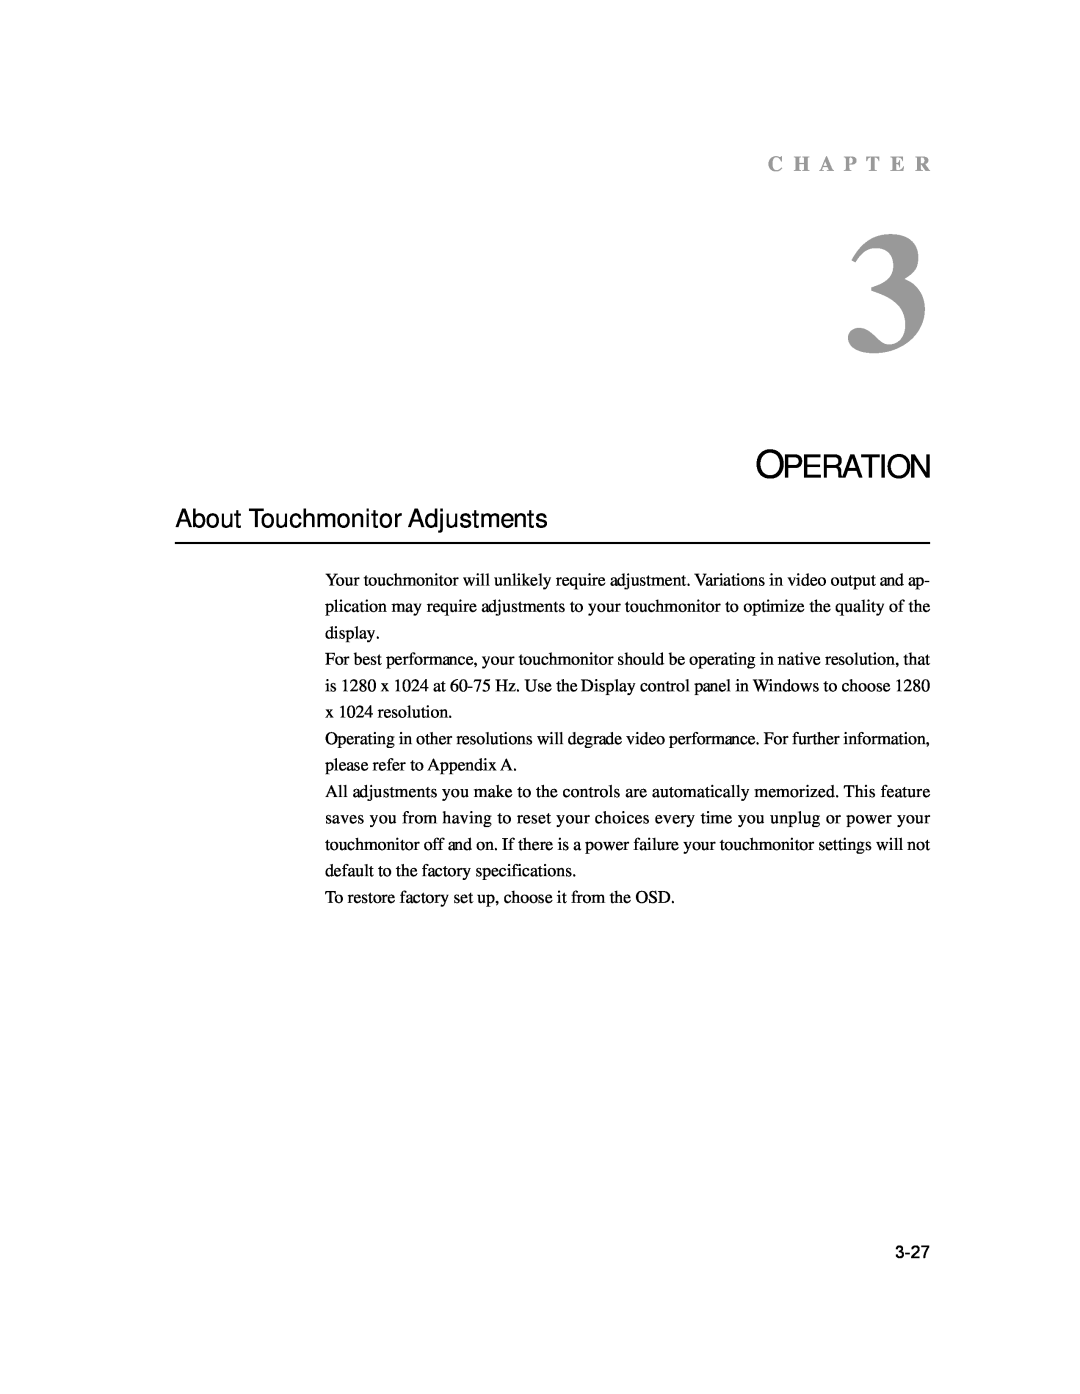 Elo TouchSystems 1729L manual Operation, About Touchmonitor Adjustments, C H A P T E R 